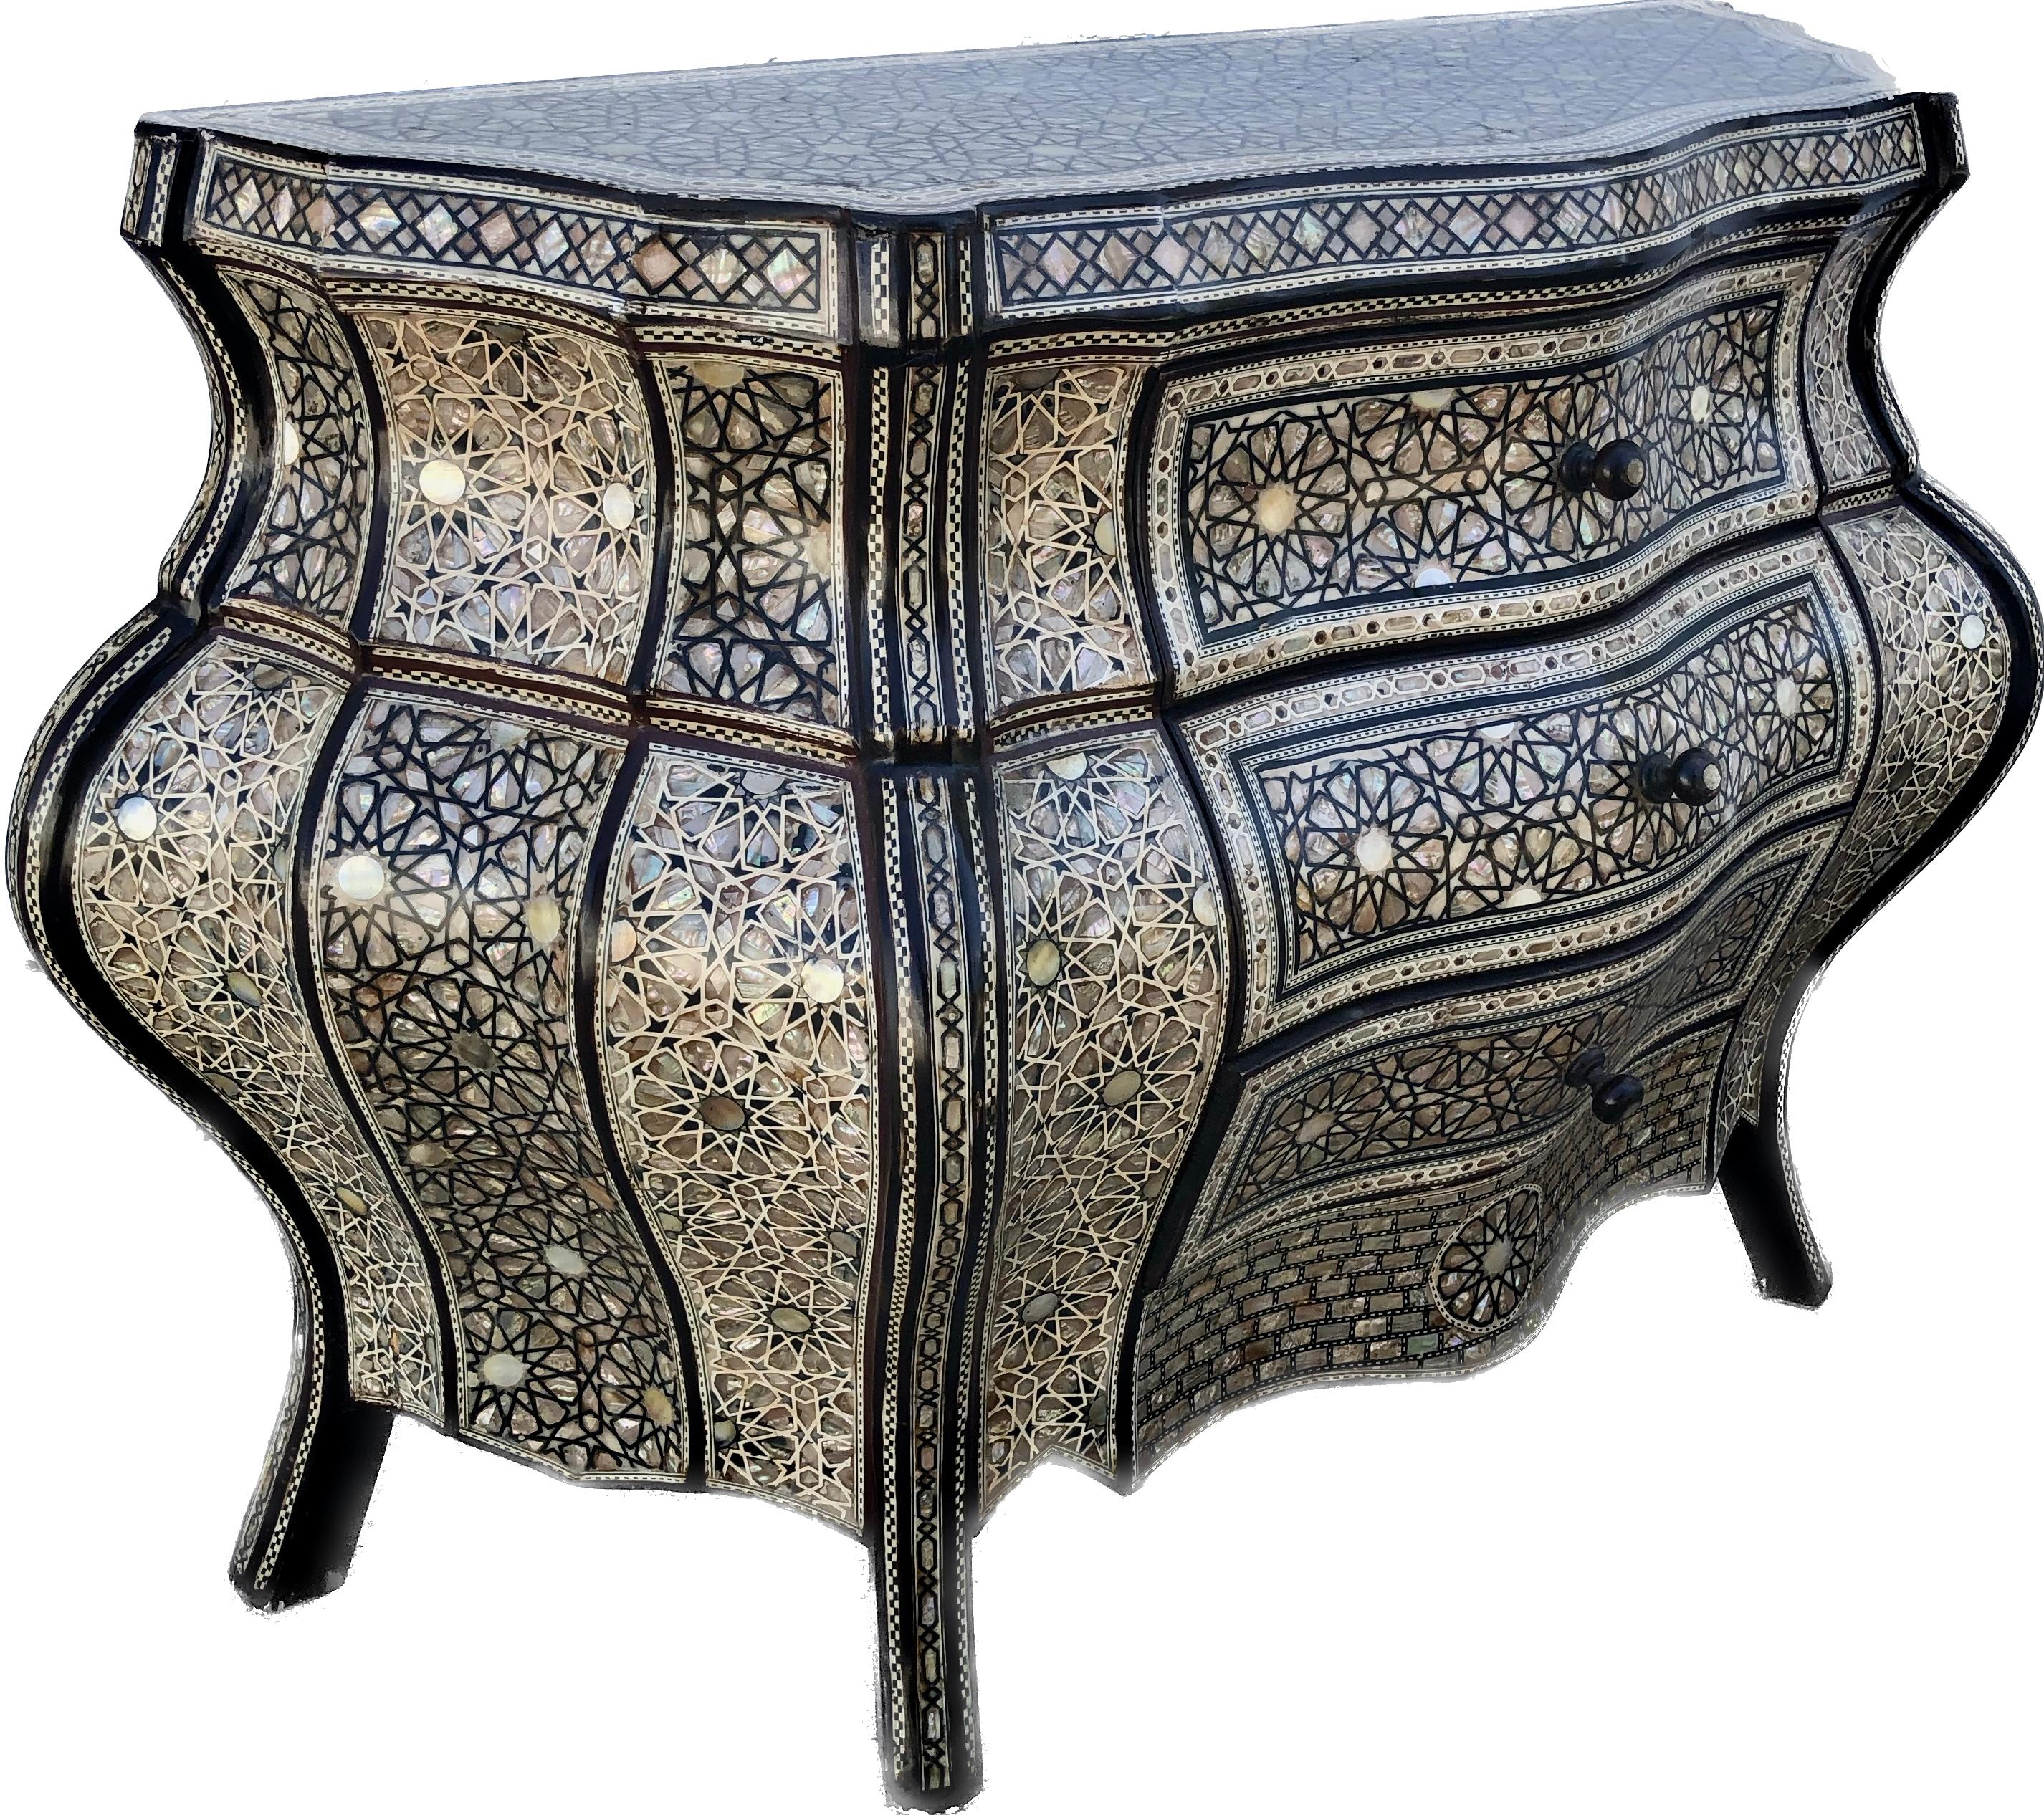 Mother-of-Pearl Moorish Style Inlaid Bombe Commode For Sale